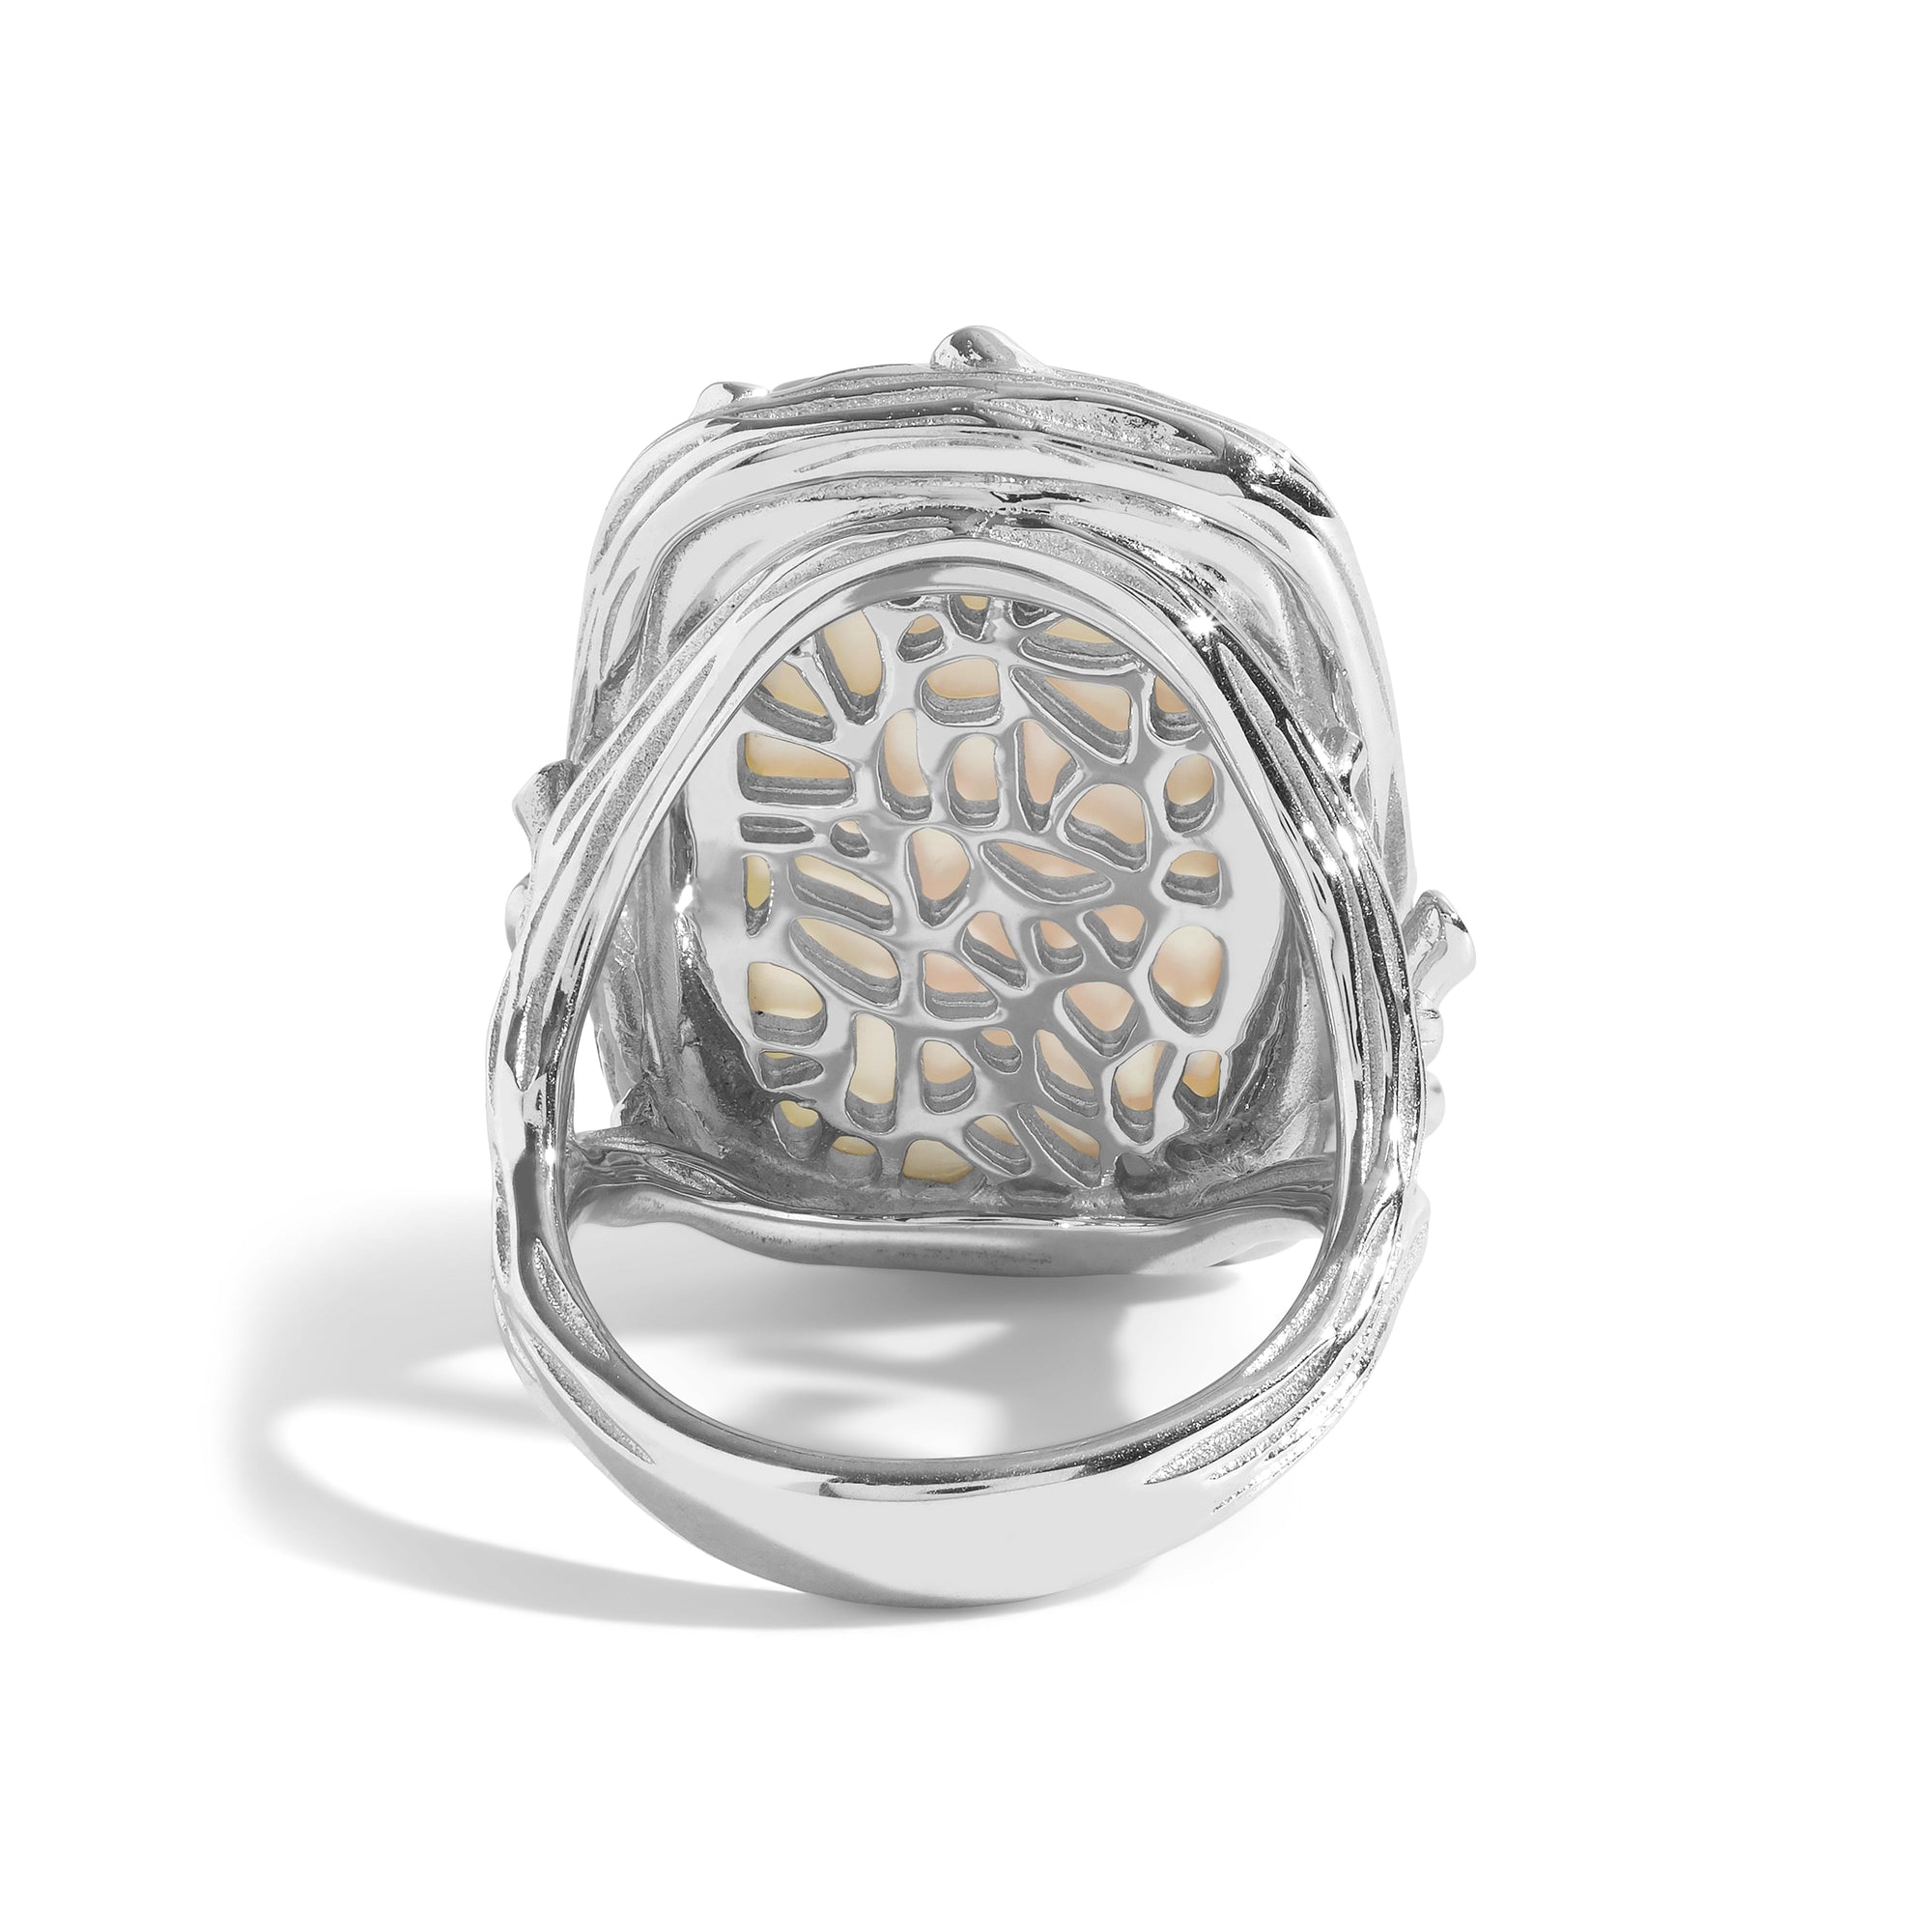 Michael Aram Enchanted Forest Ring with Mother of Pearl Doublet & Diamonds